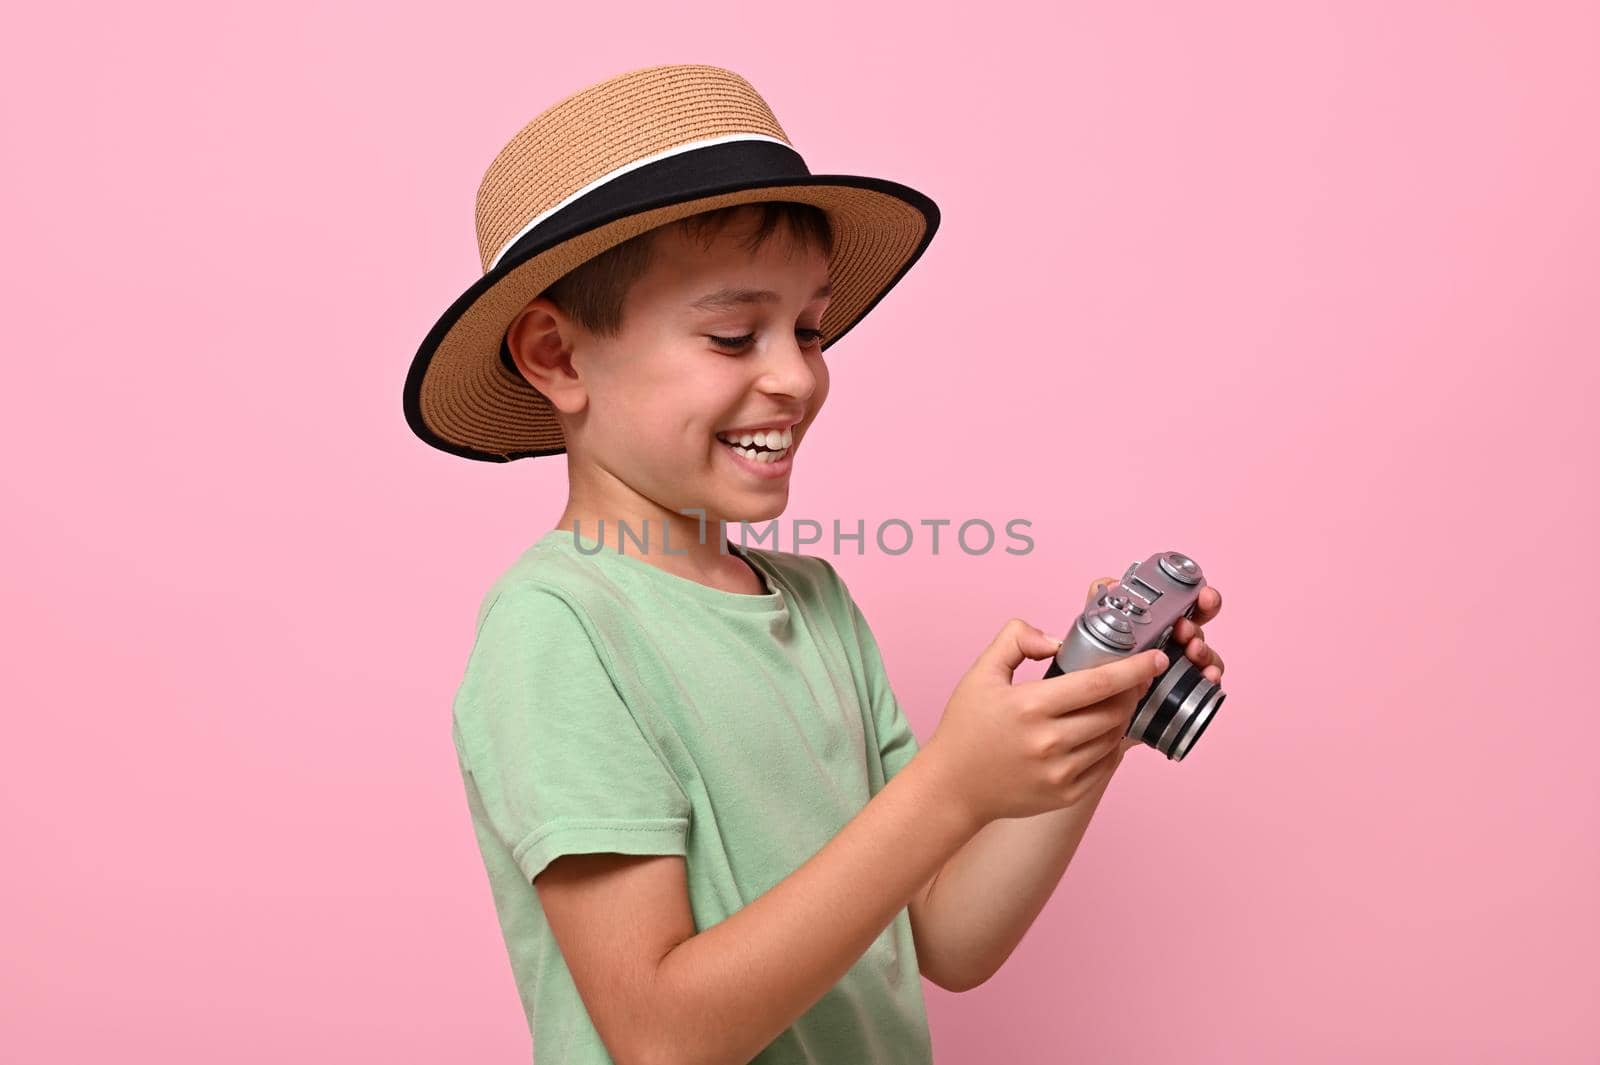 Happy child in summer outfit holding a retro vintage camera and cutely smiles with toothy smile posing over pink background with copy space. Tourism concepts by artgf